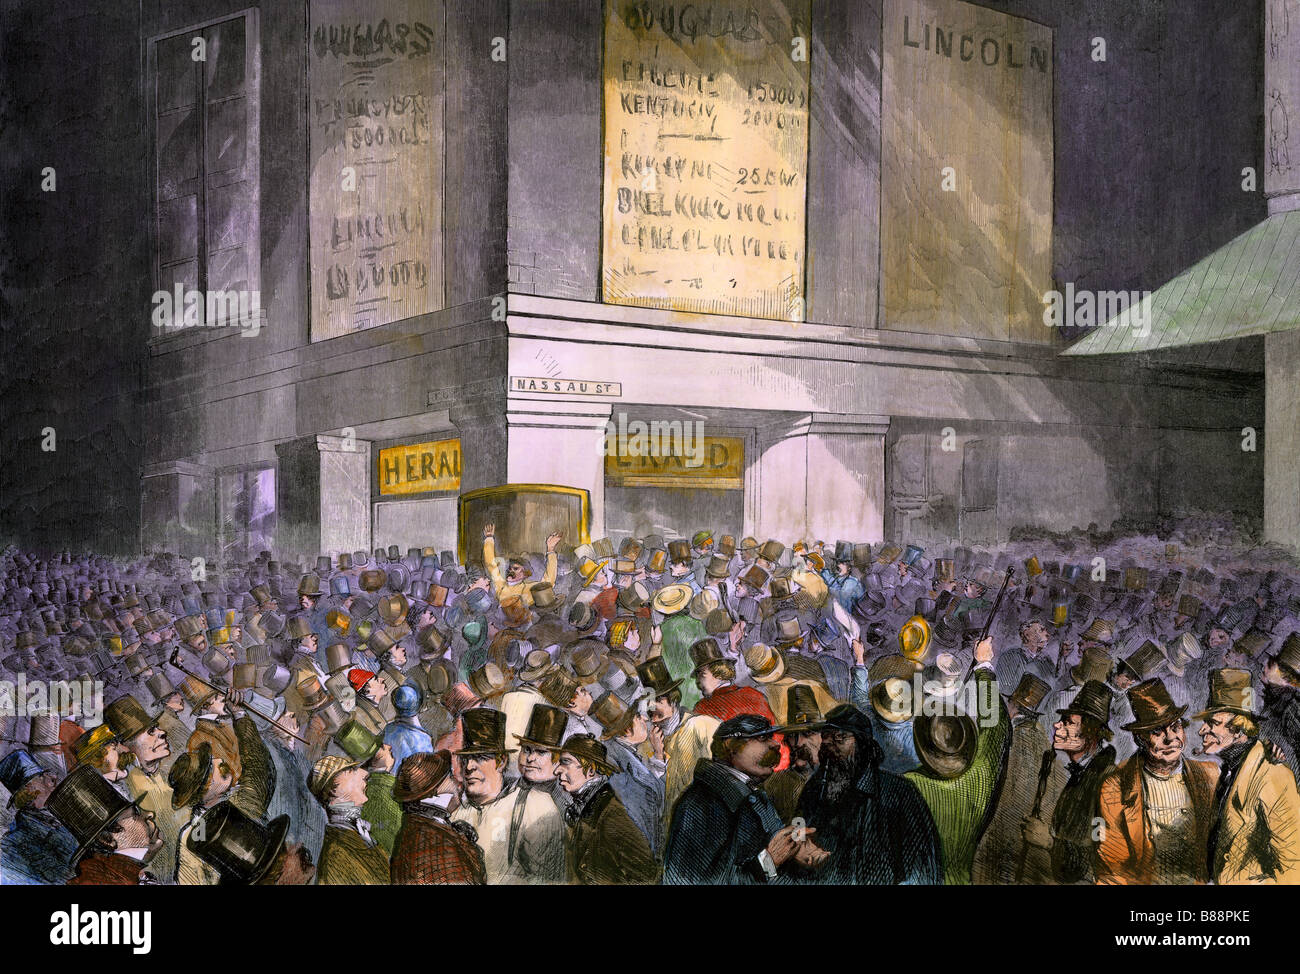 Crowd reading the announcement of Lincoln's election by Drummond Light at the New York Herald office 1860. Hand-colored woodcut Stock Photo